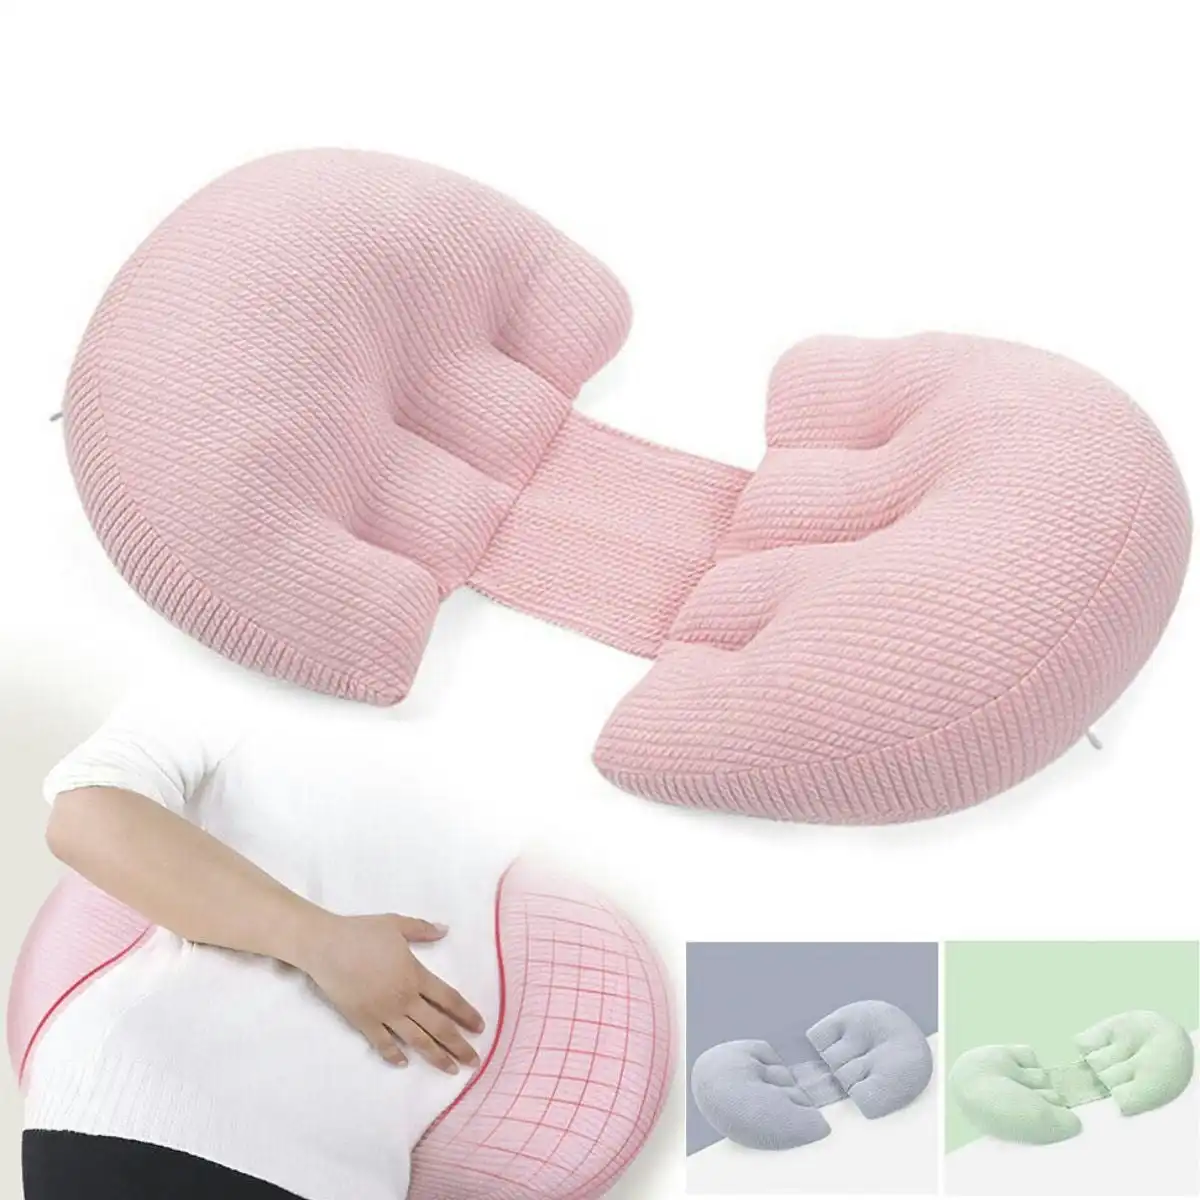 MaterniCare SnuggleMate Pregnancy, Maternity & Nursing Support Pillow